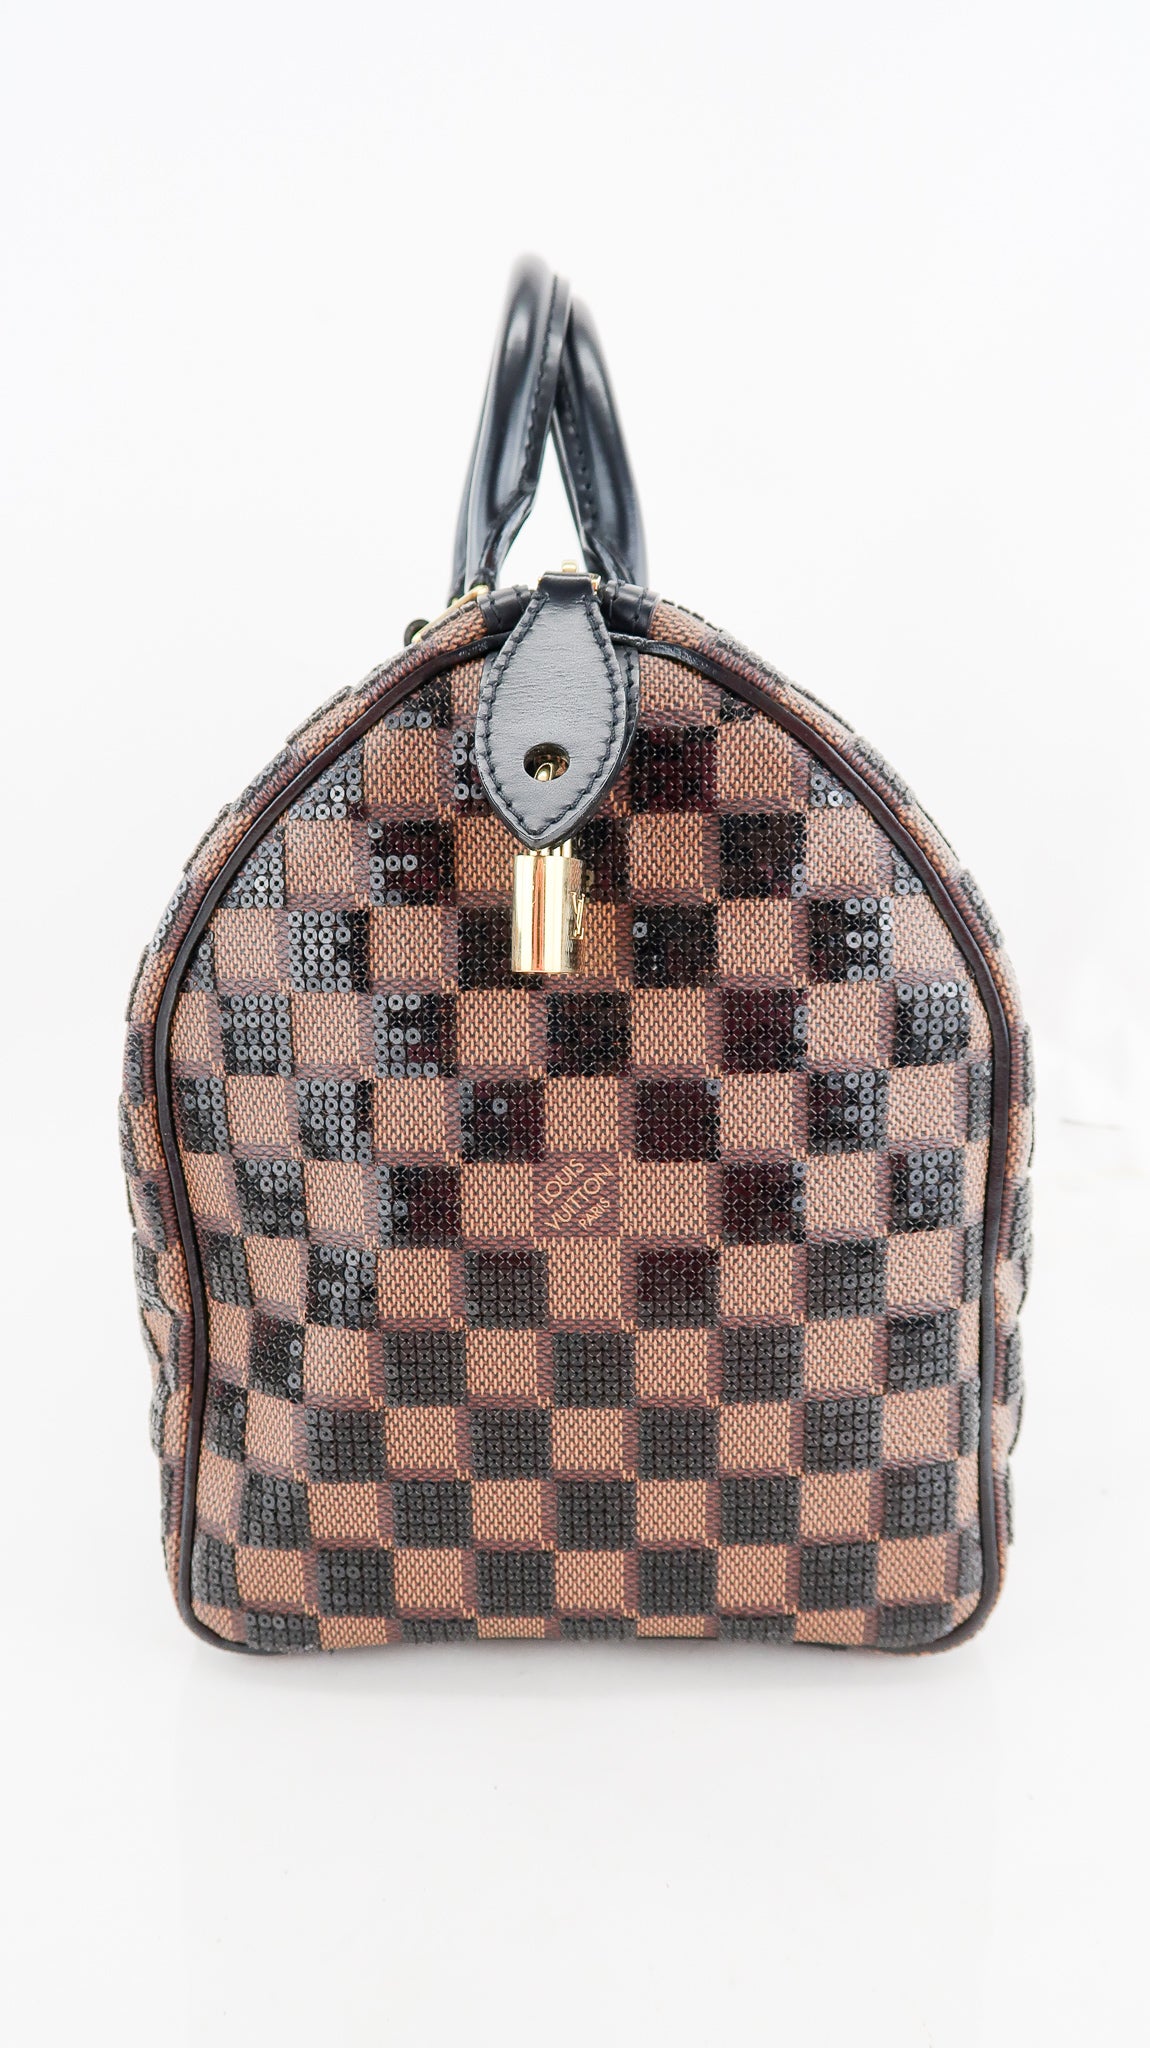 LOUIS VUITTON Damier Paillettes Speedy 30 with Navy Sequins For